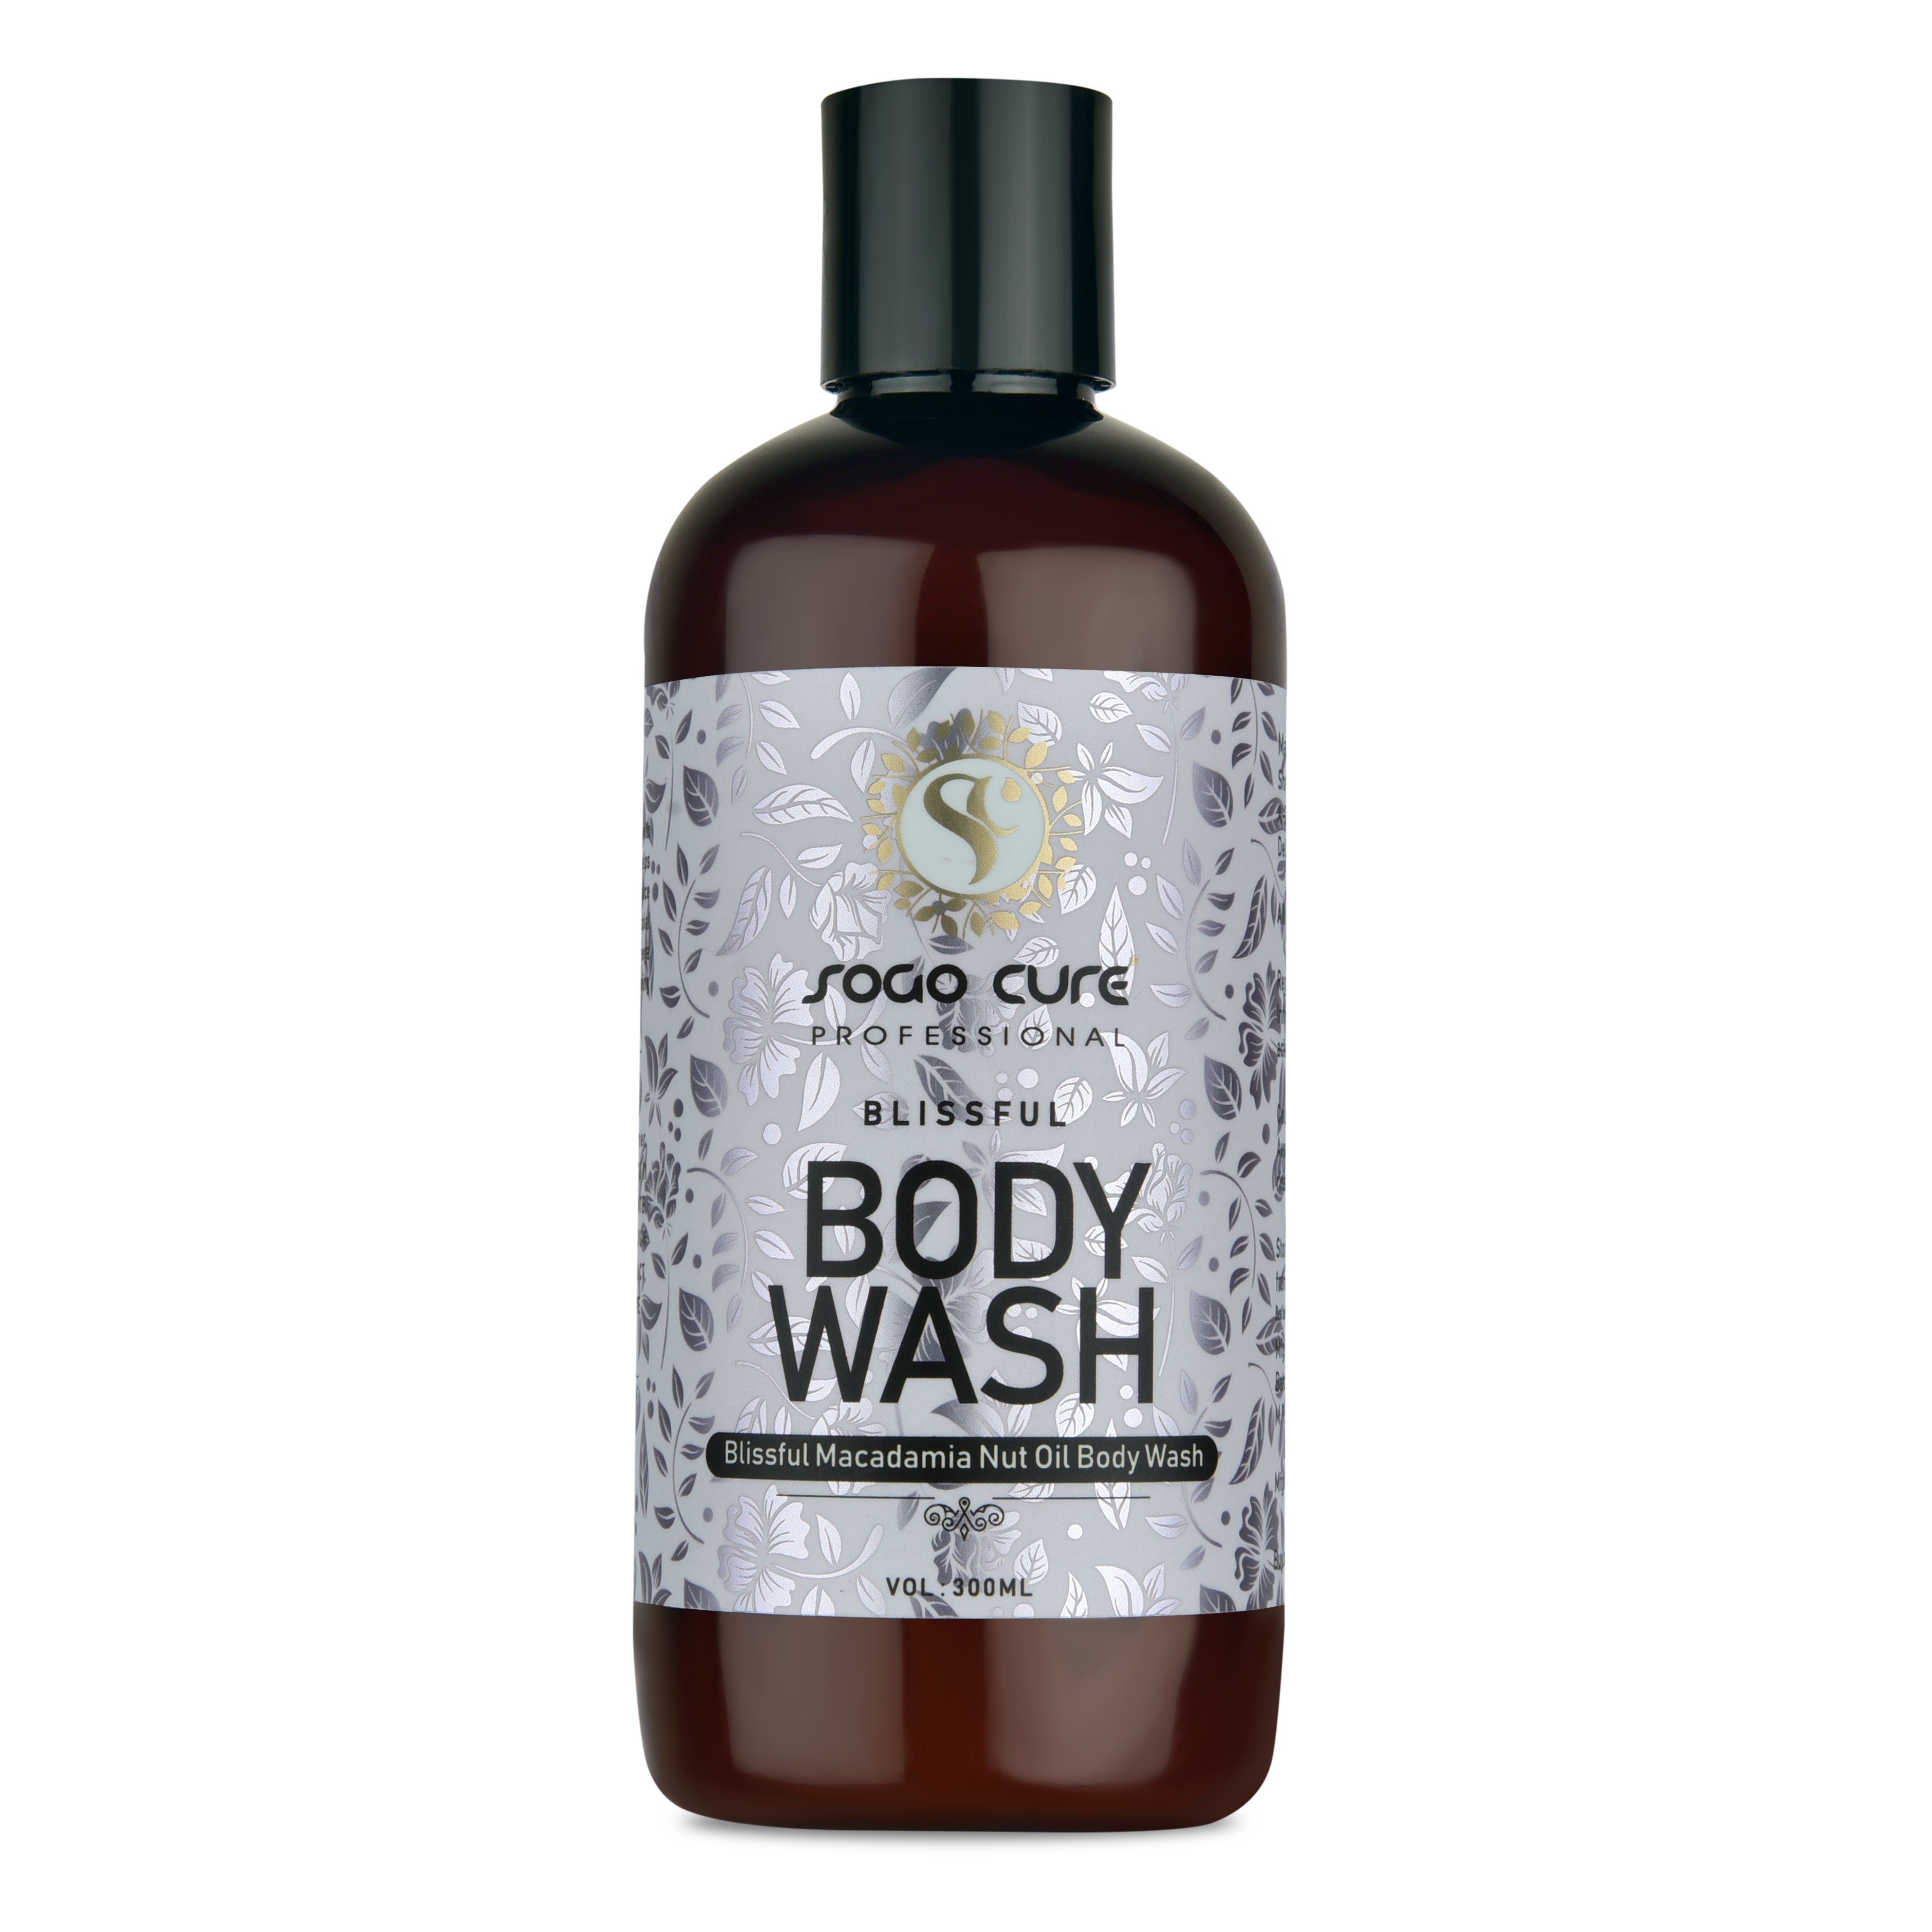 Blissful Body Wash Single Pump Bottle Essential Oil & Lemon Extracts for a Soft and Smooth Skin, pH Balanced Free of Parabens & Silicones Body Wash